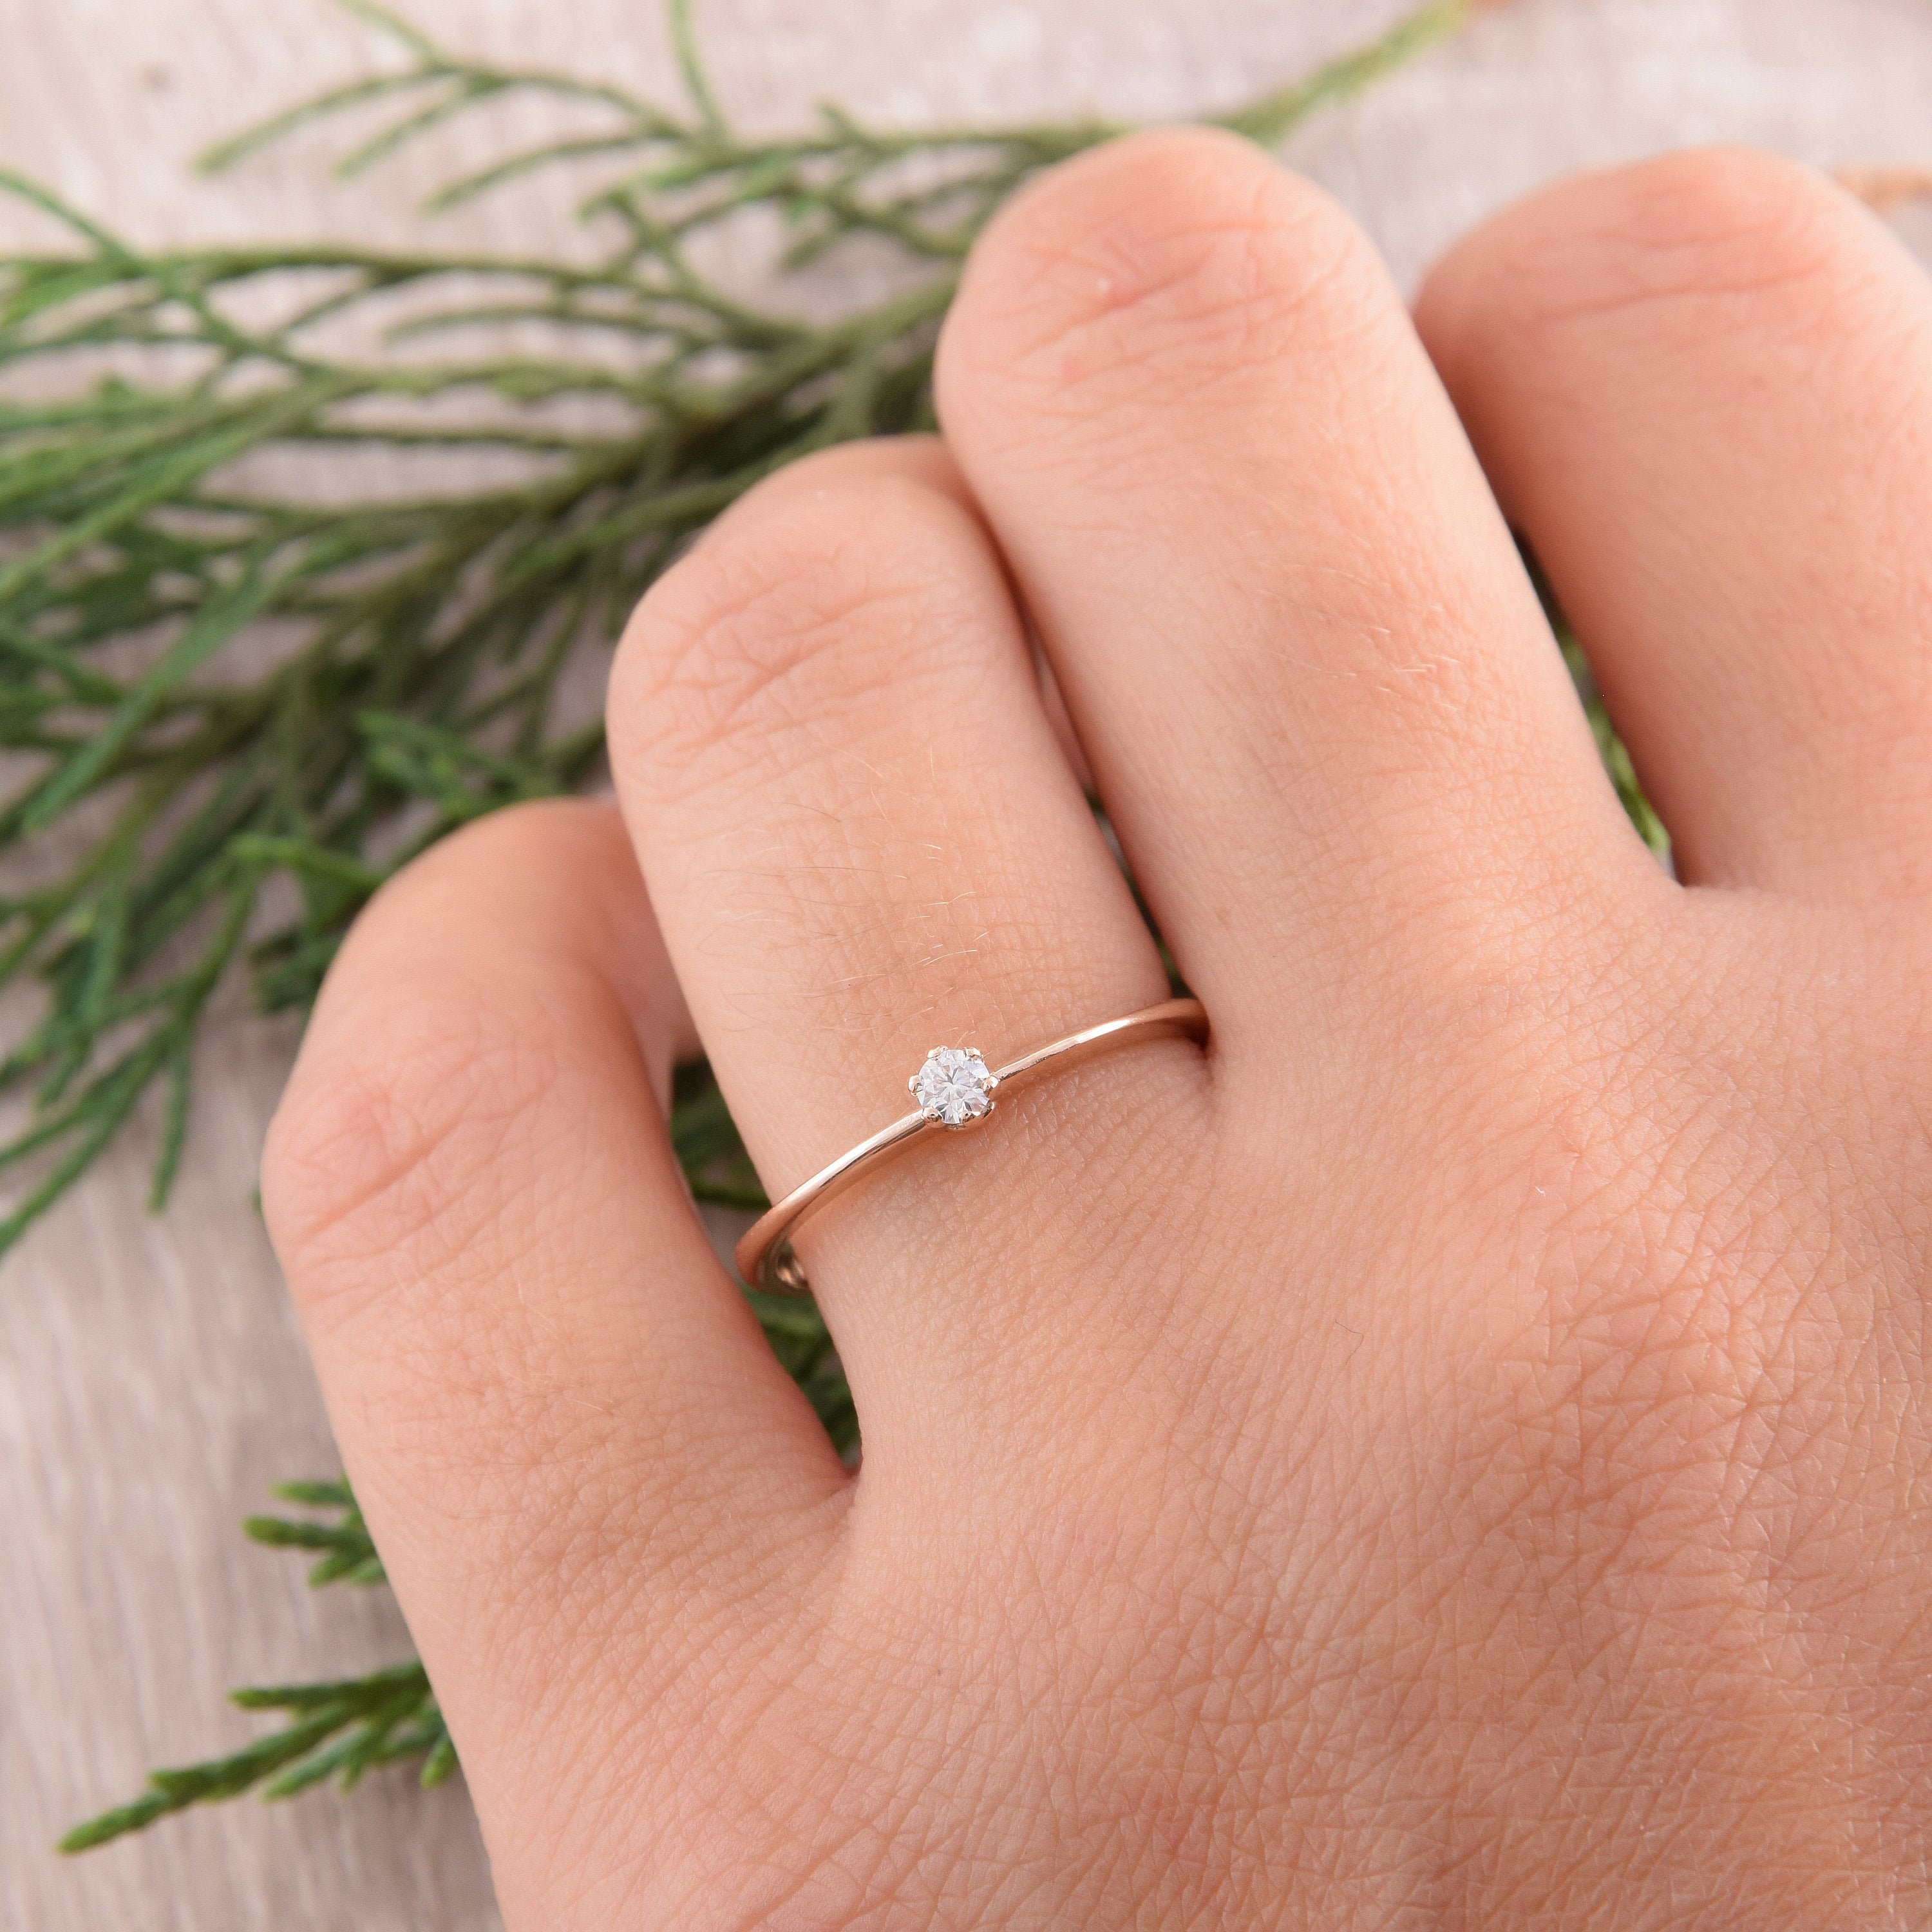 Womens Small Promise Ring, Simple Promise Ring, Dainty Gold Promise Ring  for Her, Gold Minimalist Ring, Delicate Promise Ring, Elegant Ring -   Canada